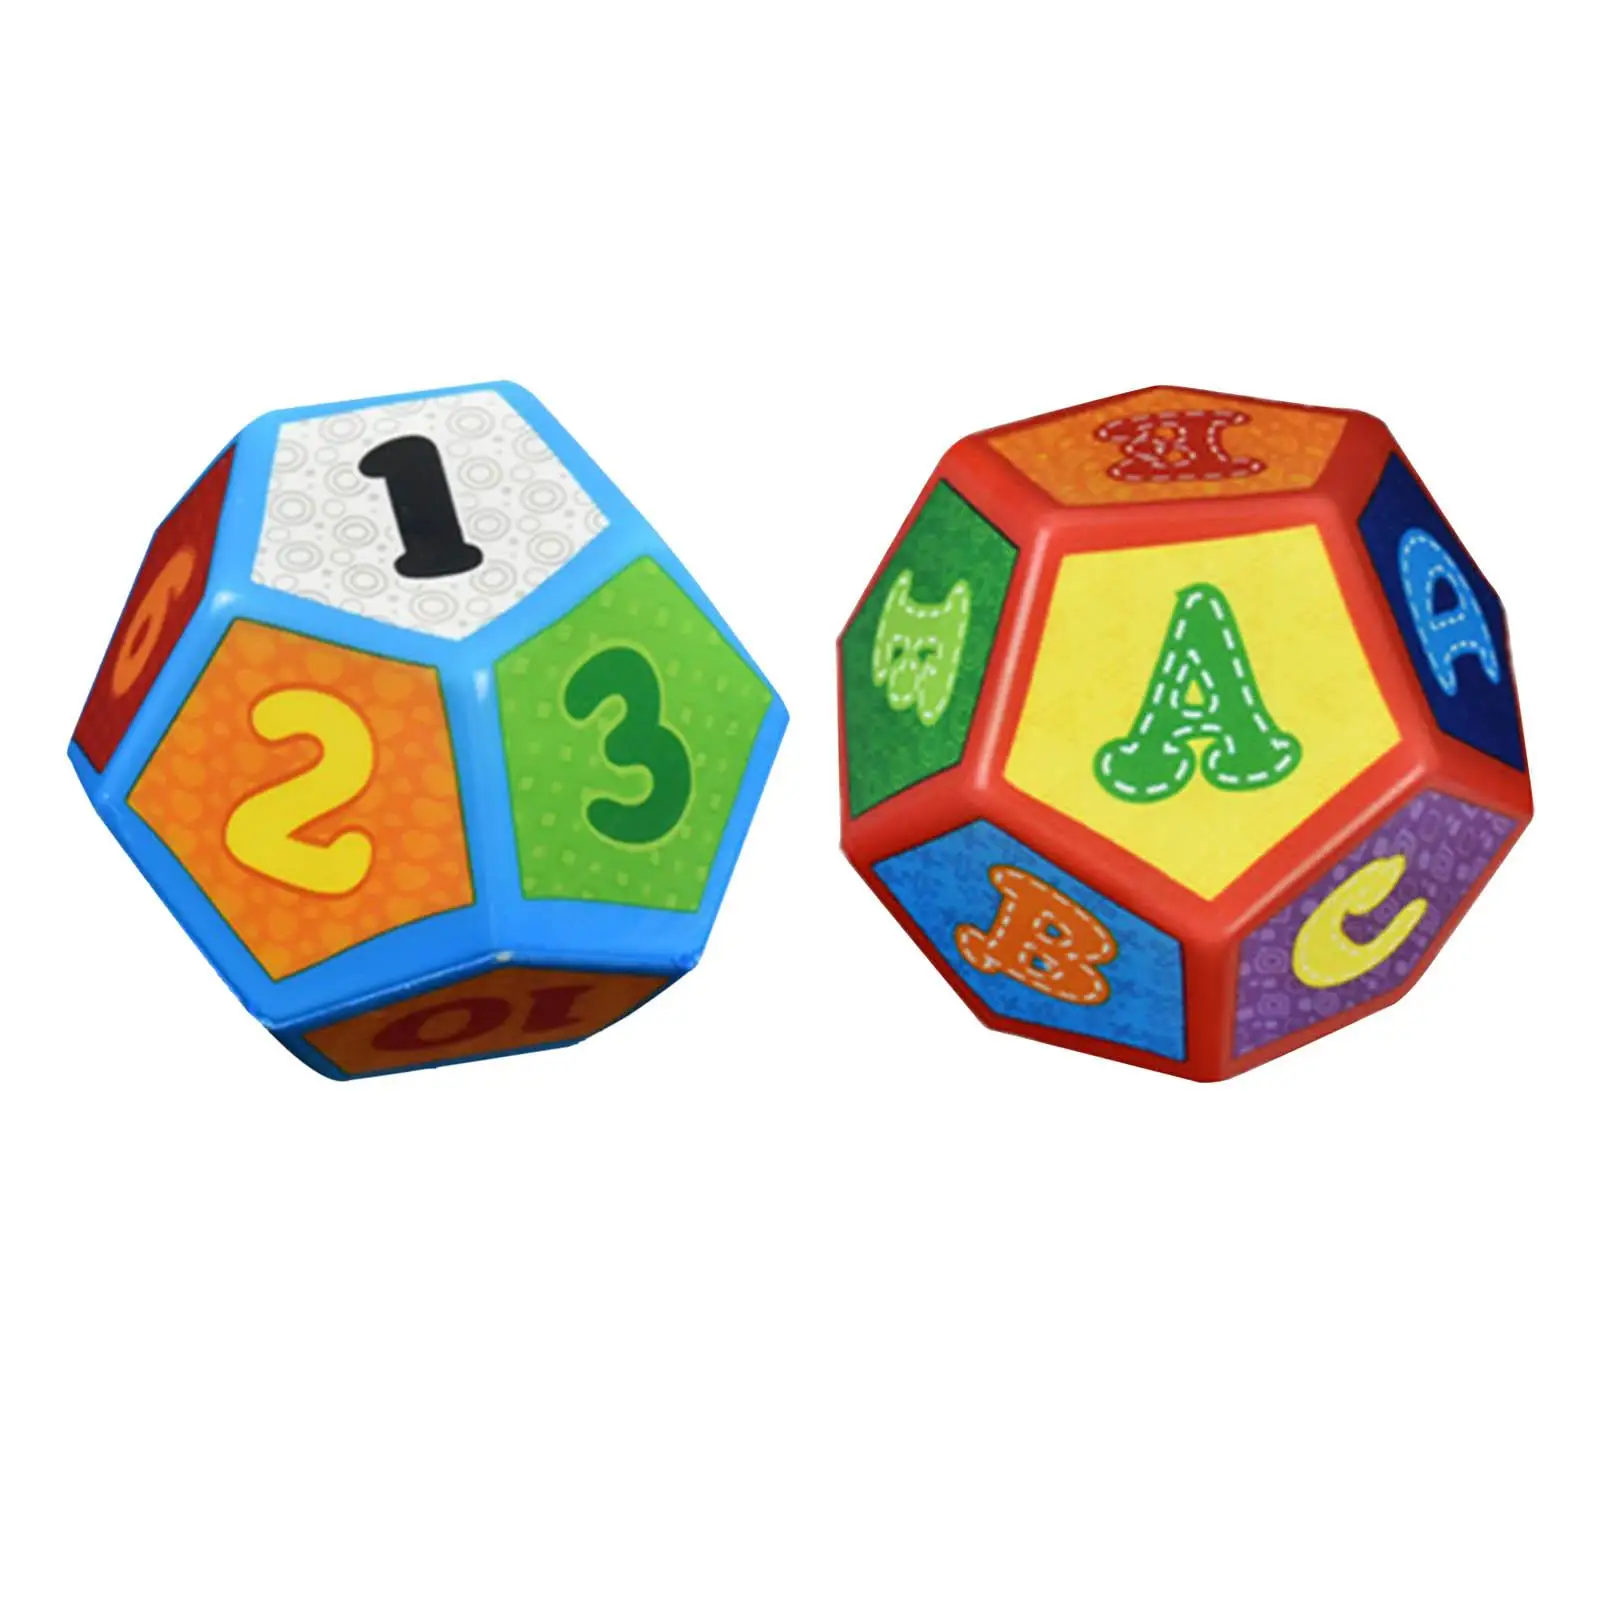 PU 12 Sided Dice 60G Role Playing Game Play Entertainment Toys Kids Foam Die for ,Family Party Supplies Family Gathering Gifts